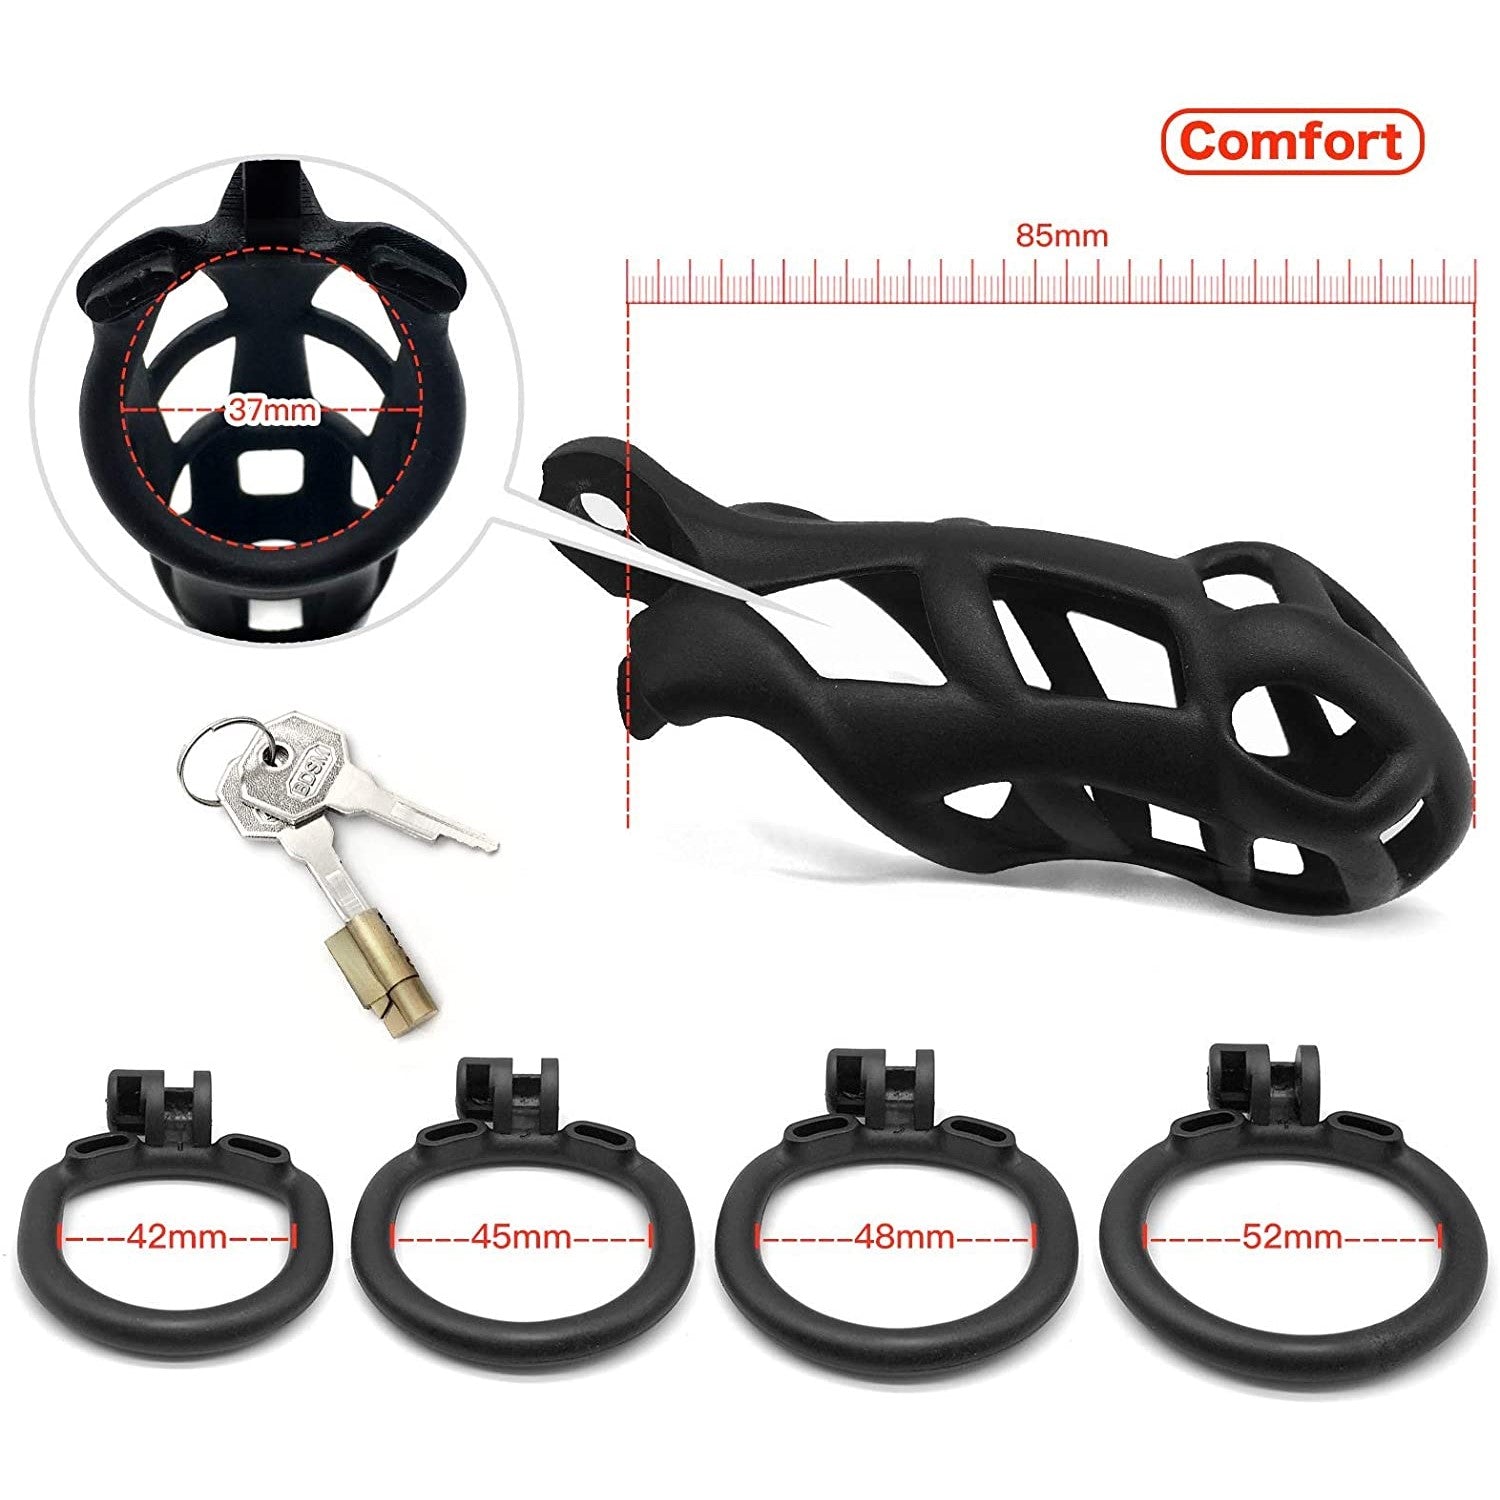 Cobra Male Chastity Device Kit 1.97 to 3.94 inches Long – CHASTITY CAGE CO